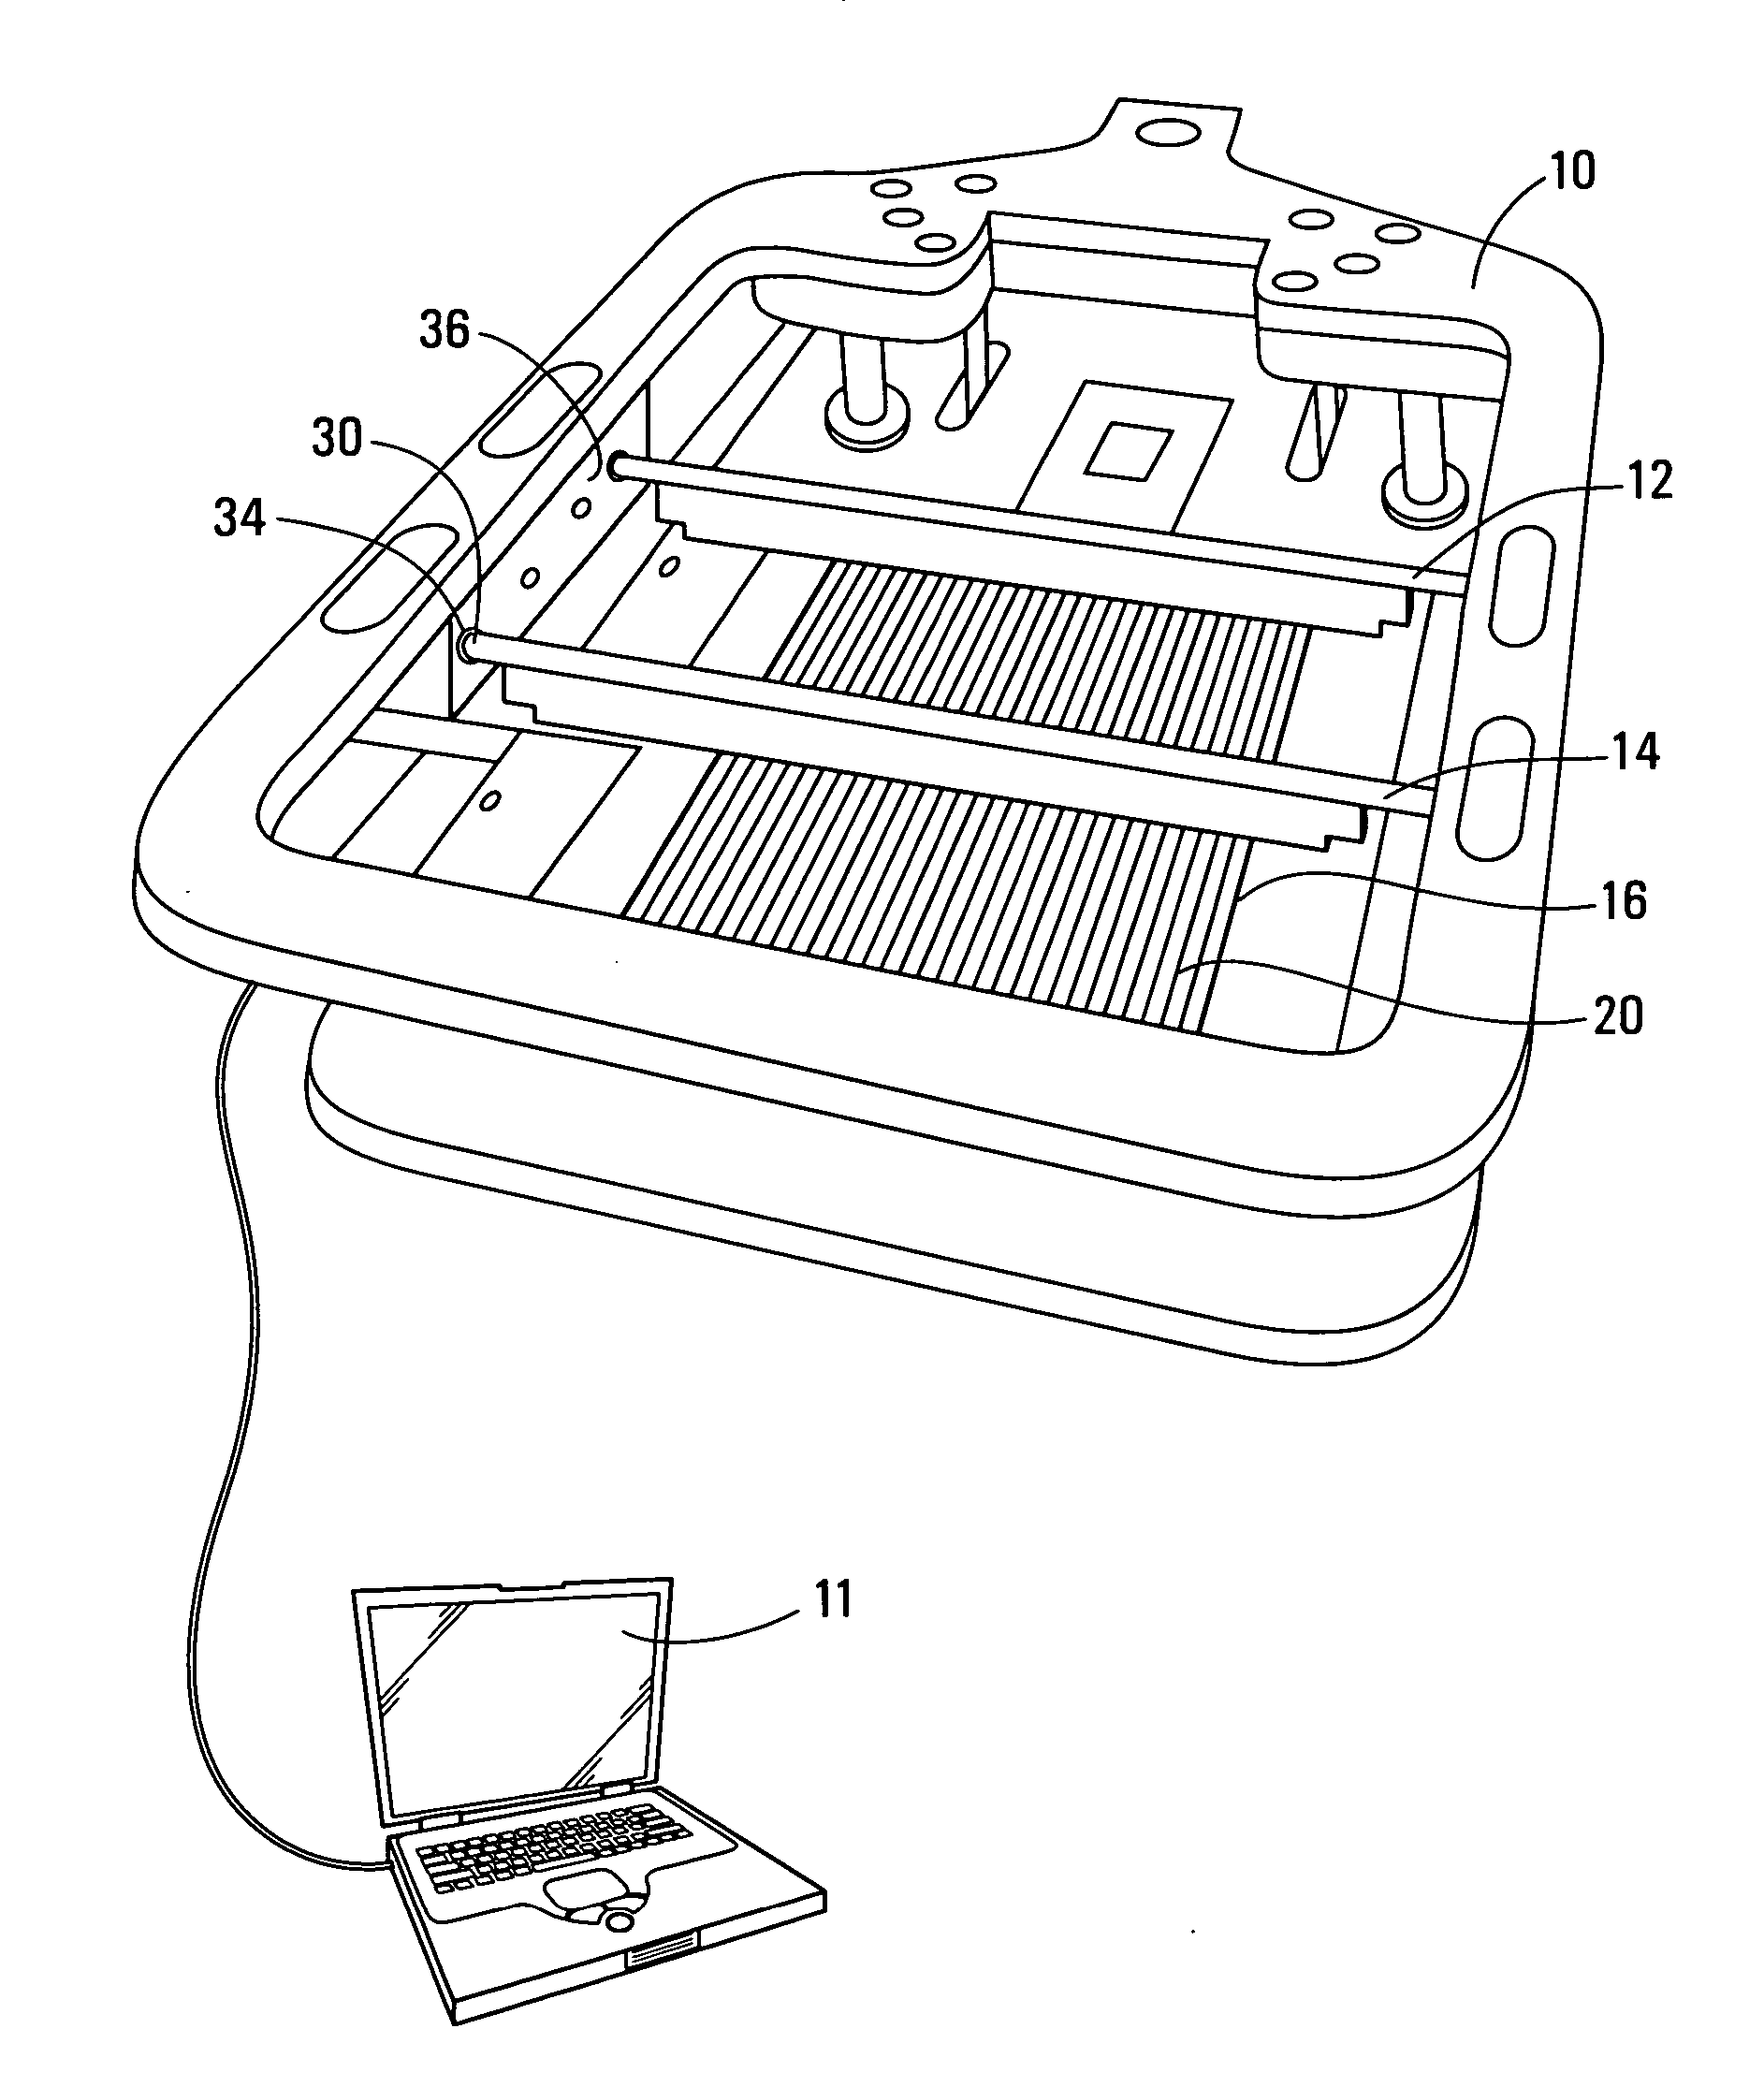 Testing apparatus and method for solar cells